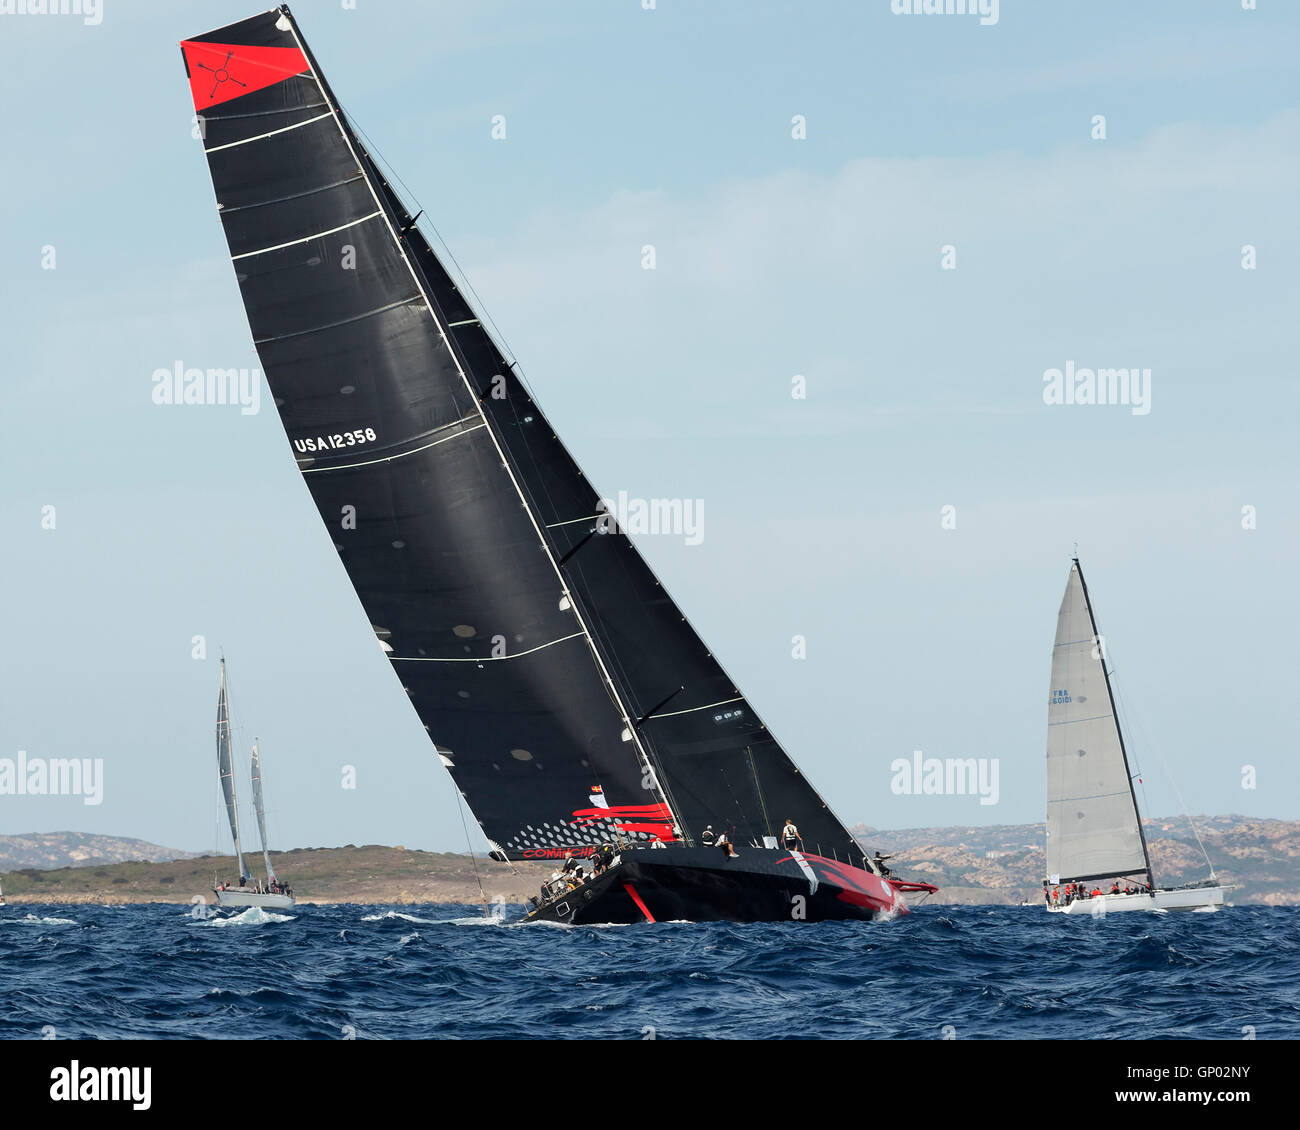 PORTO CERVO - 8 SEPTEMBER: Comanche at Maxi Yacht Rolex Cup sail boat race, this sailboat is build to be the fastest monohull ev Stock Photo